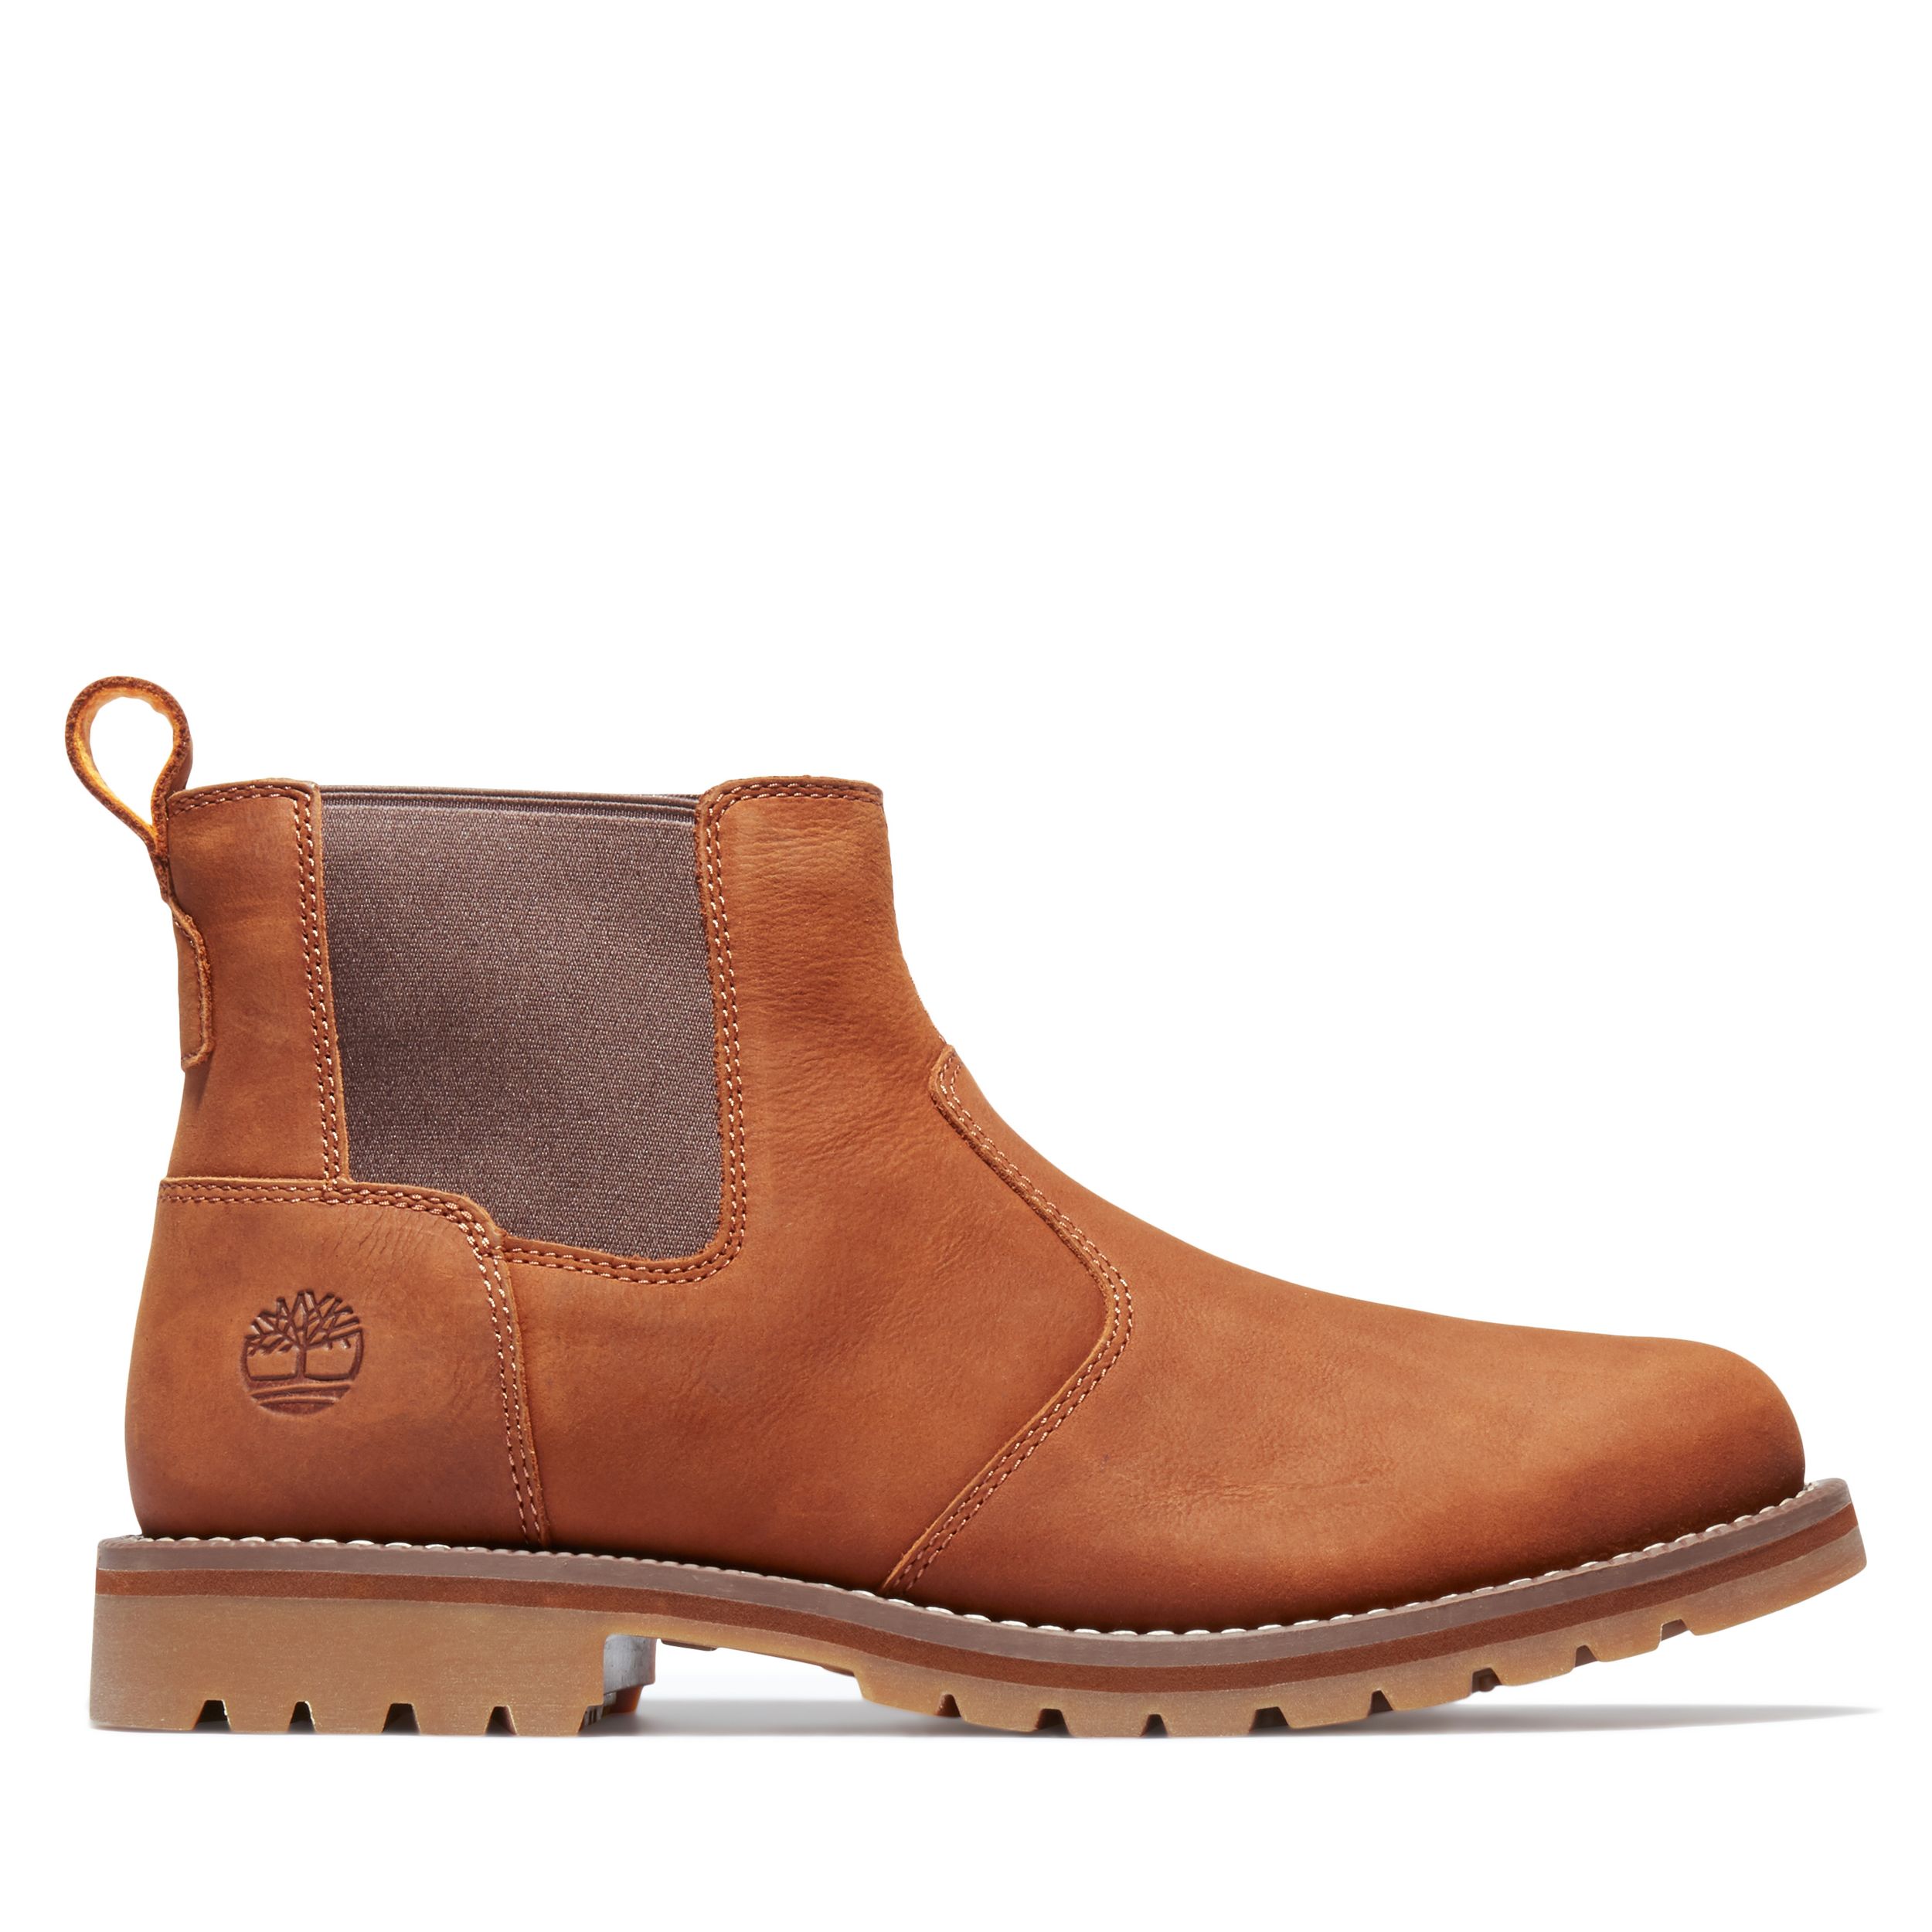 Image of Timberland Men's Redwood Falls Chelsea Boots